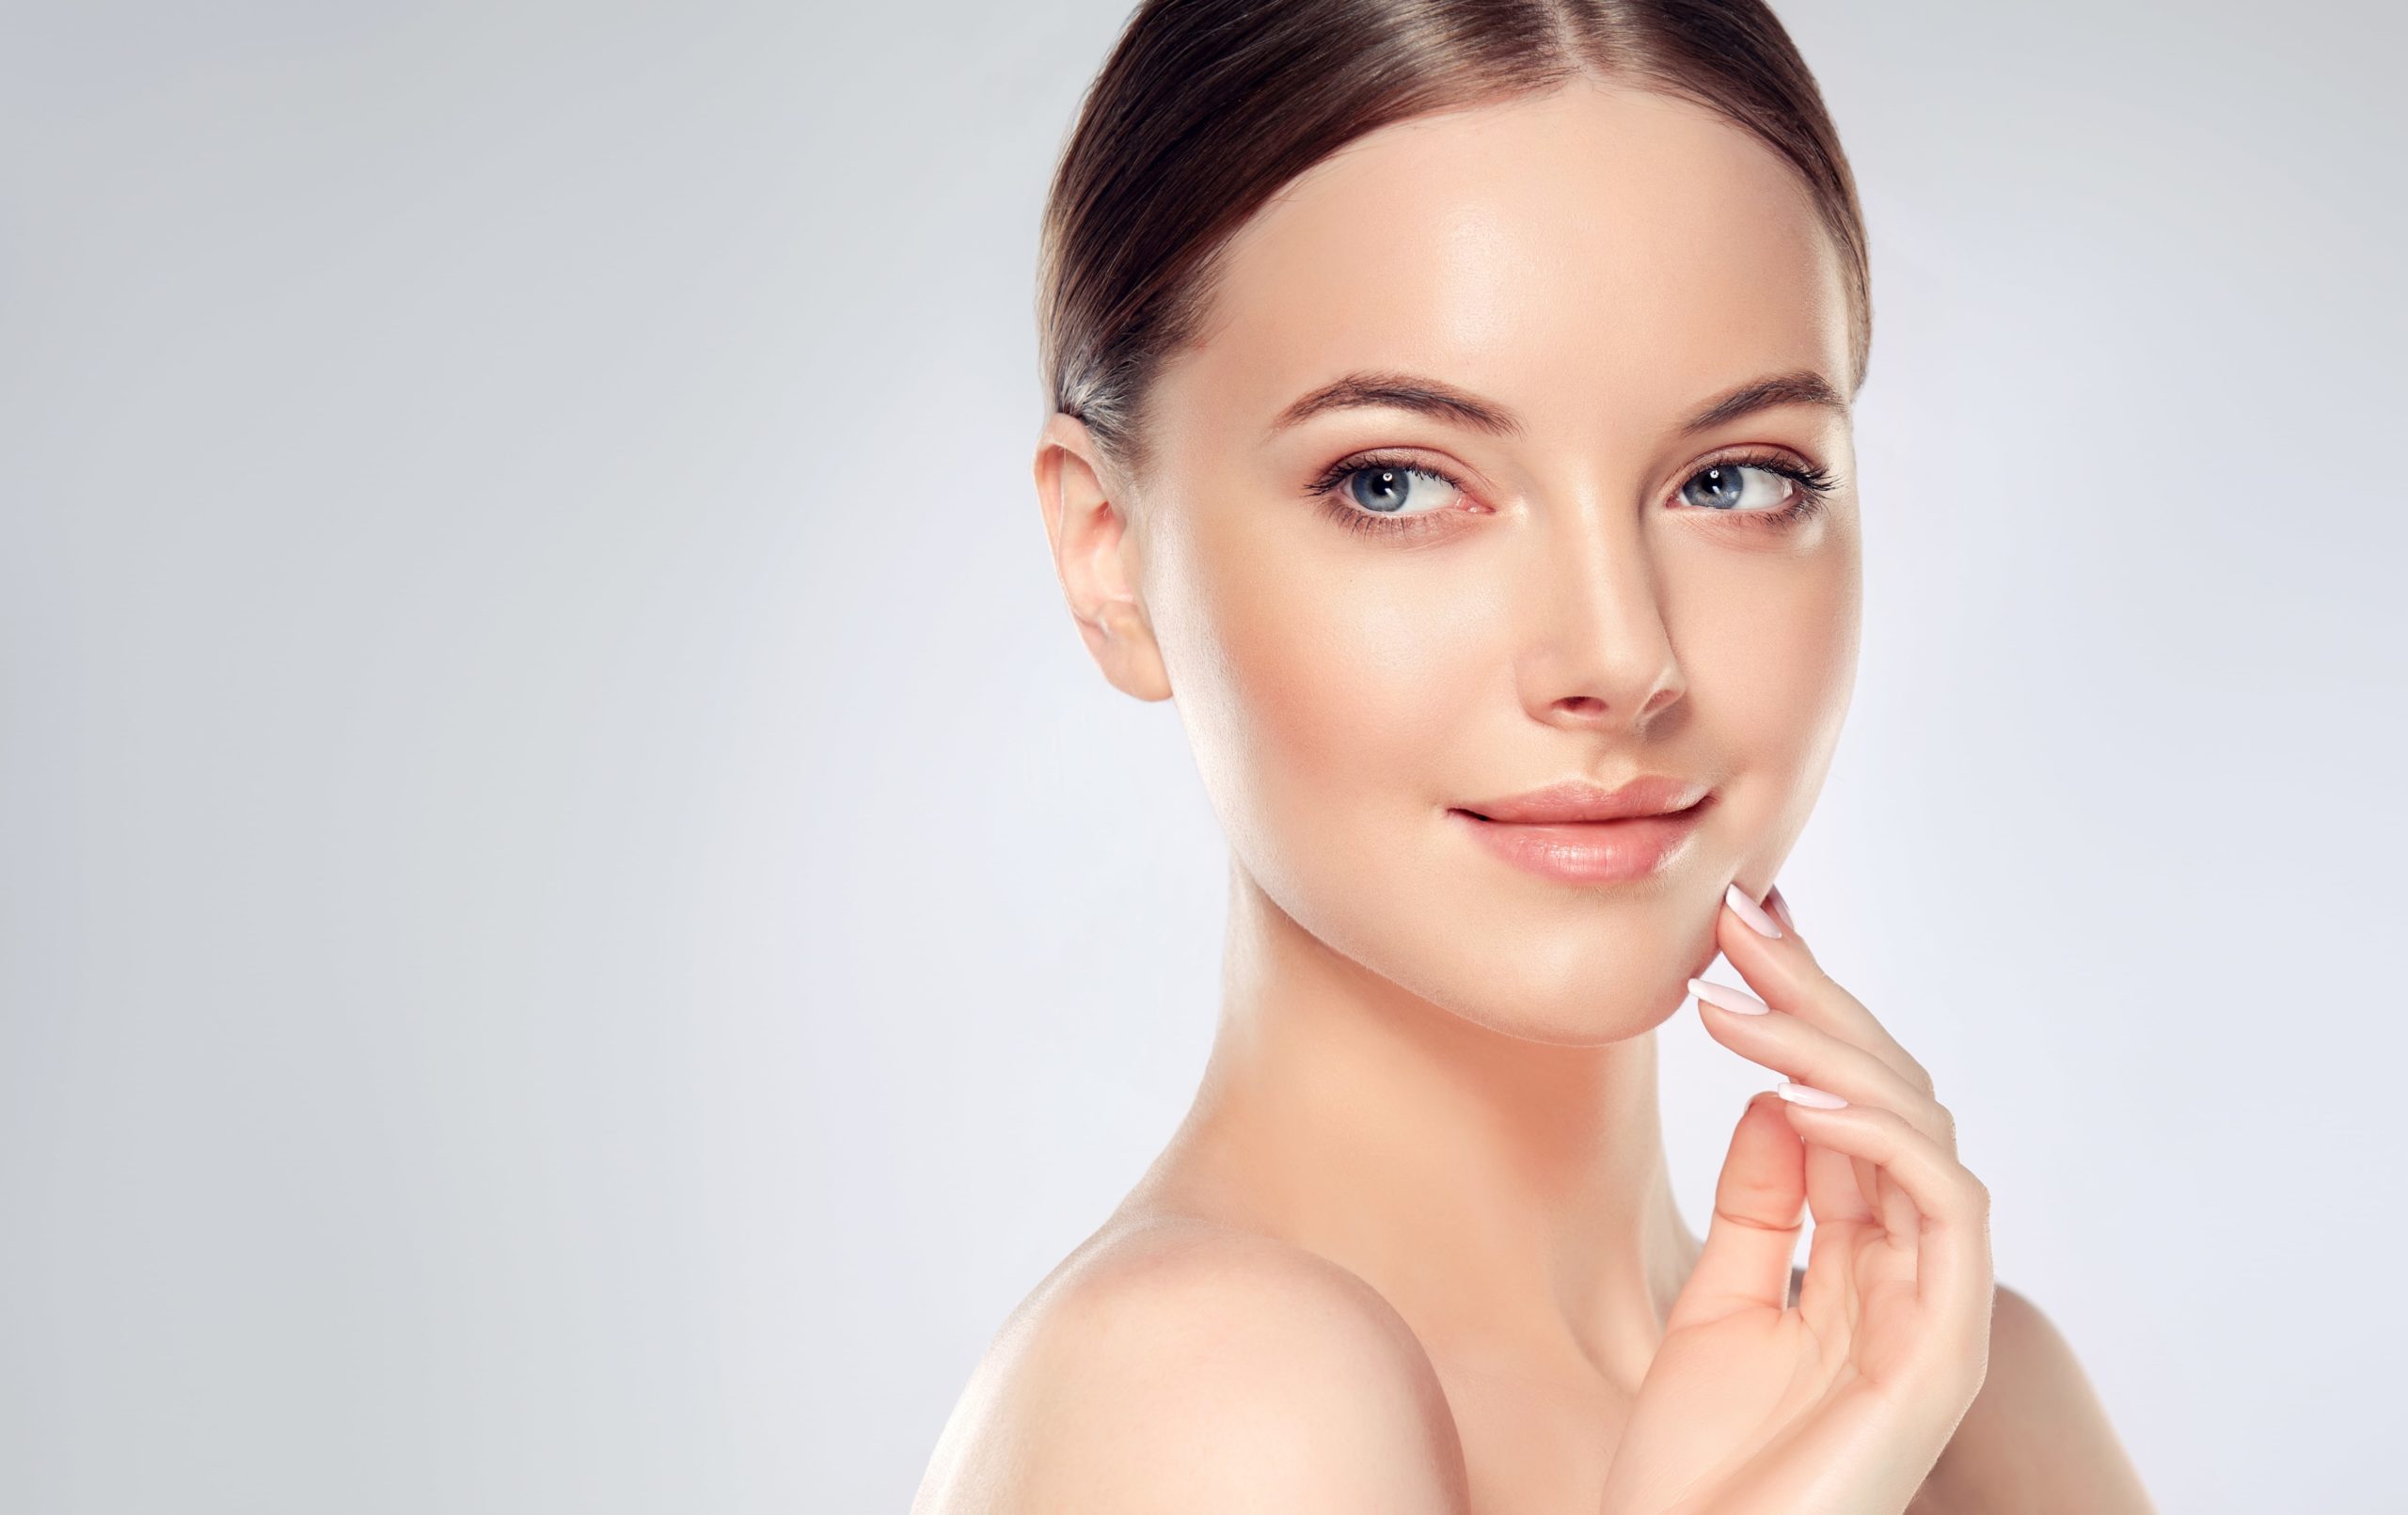 What does Sculptra do to your face